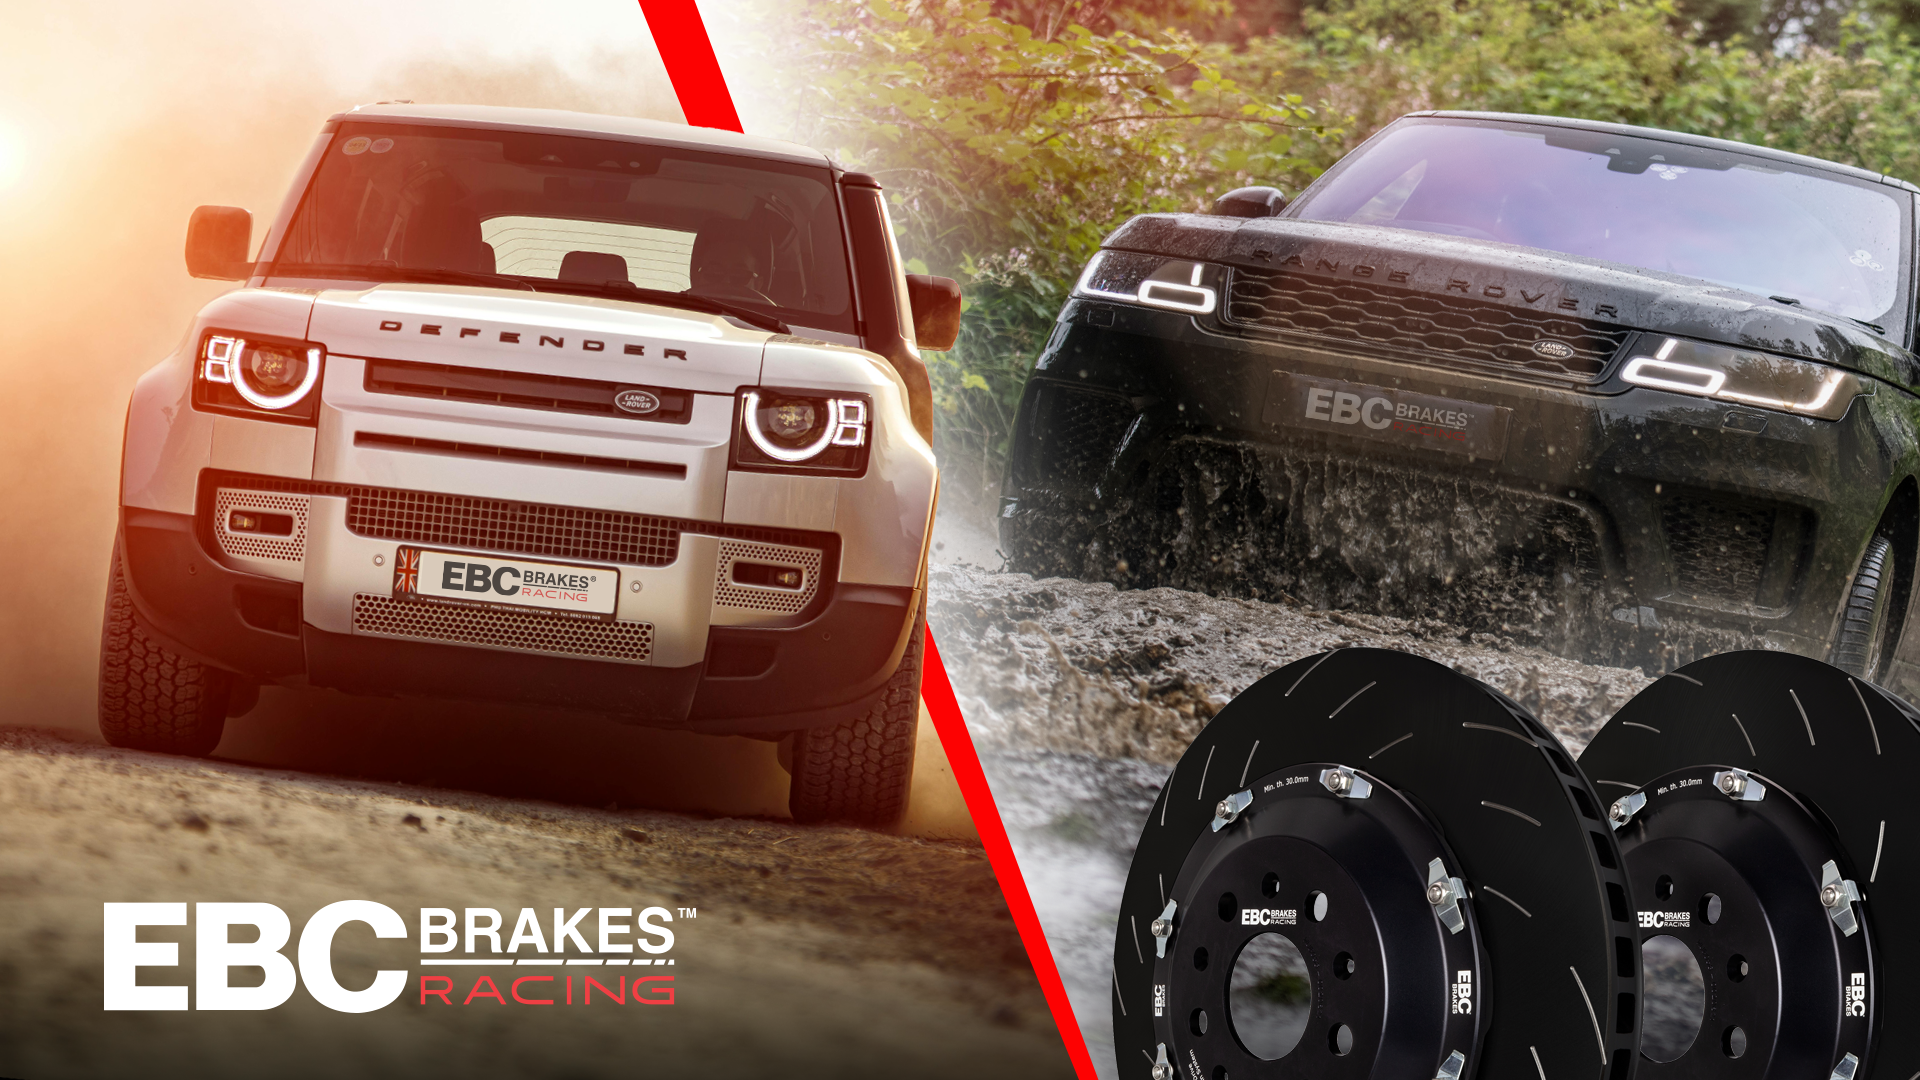 Now Available: EBC Brakes Racing Fully Floating Two-Piece Discs for Recent Land Rover Defender and Range Rover Models